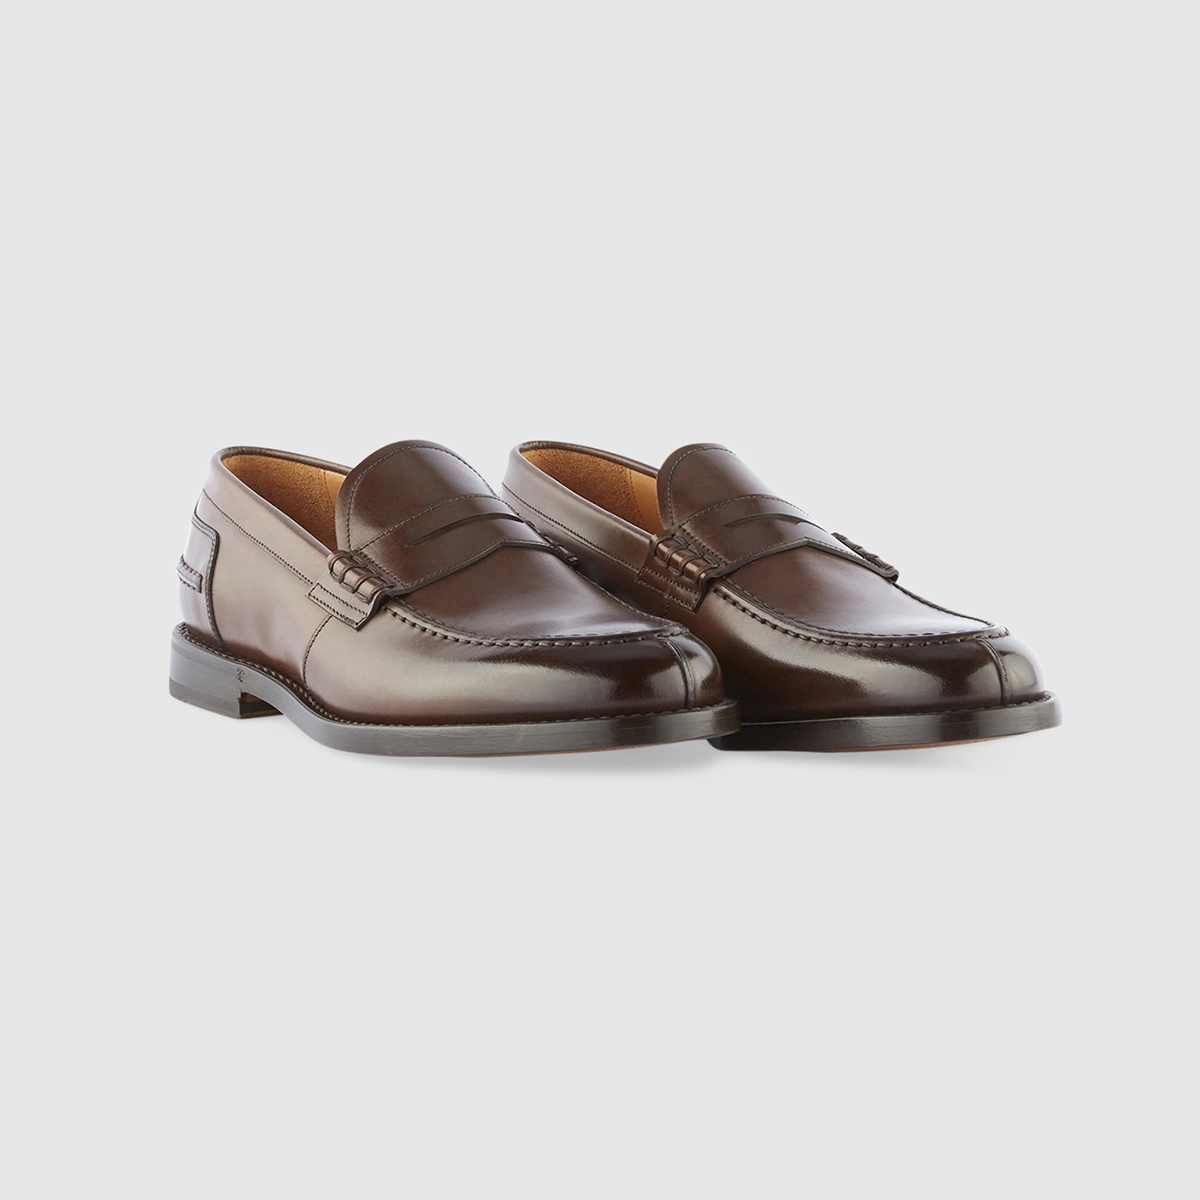 College Loafers in Brown Brushed Calfskin Leather Gruppo Fabi on sale 2022 2